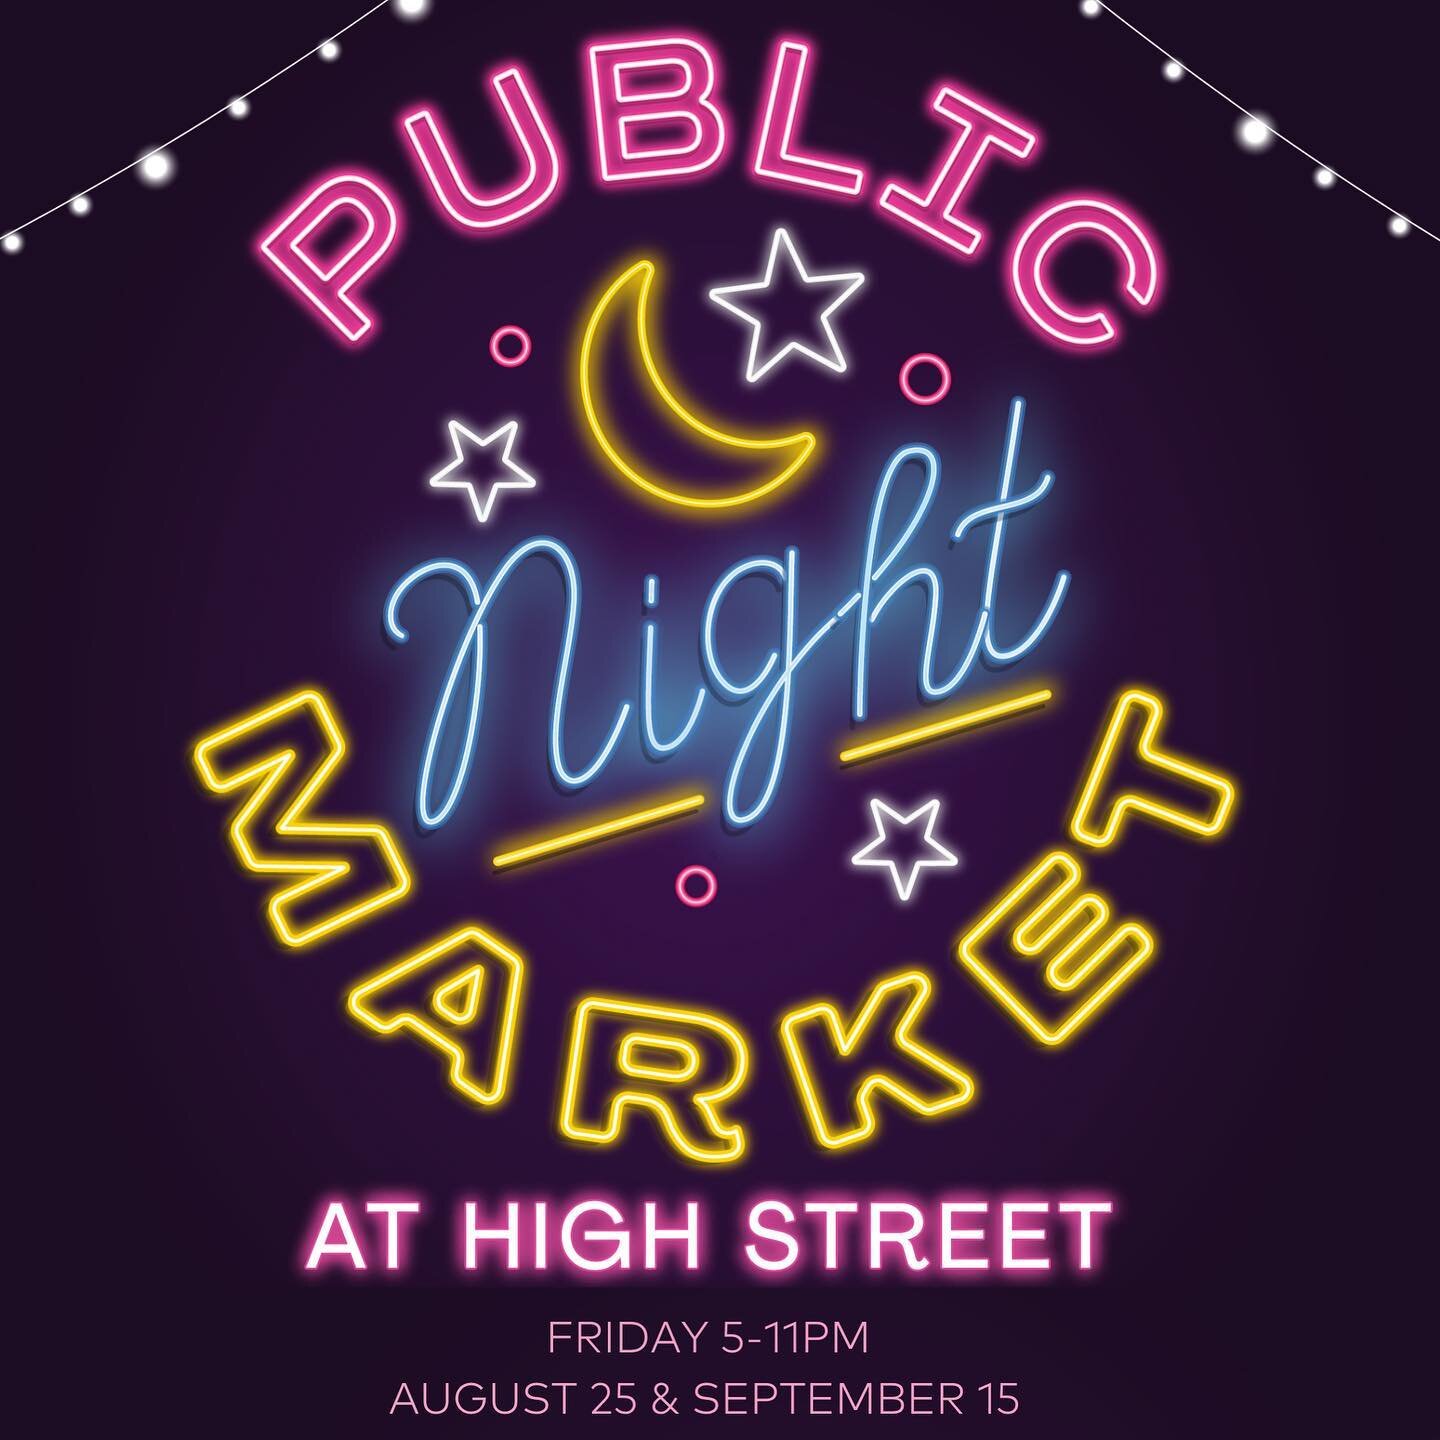 We&rsquo;re back in High Street #yeg this FRIDAY for the Public Night Market! Join us 5-11PM on @shop124street and explore our biggest night market yet! 
✨
Come hungry and ready to support some of your favourite local makers, bakers &amp; the local r